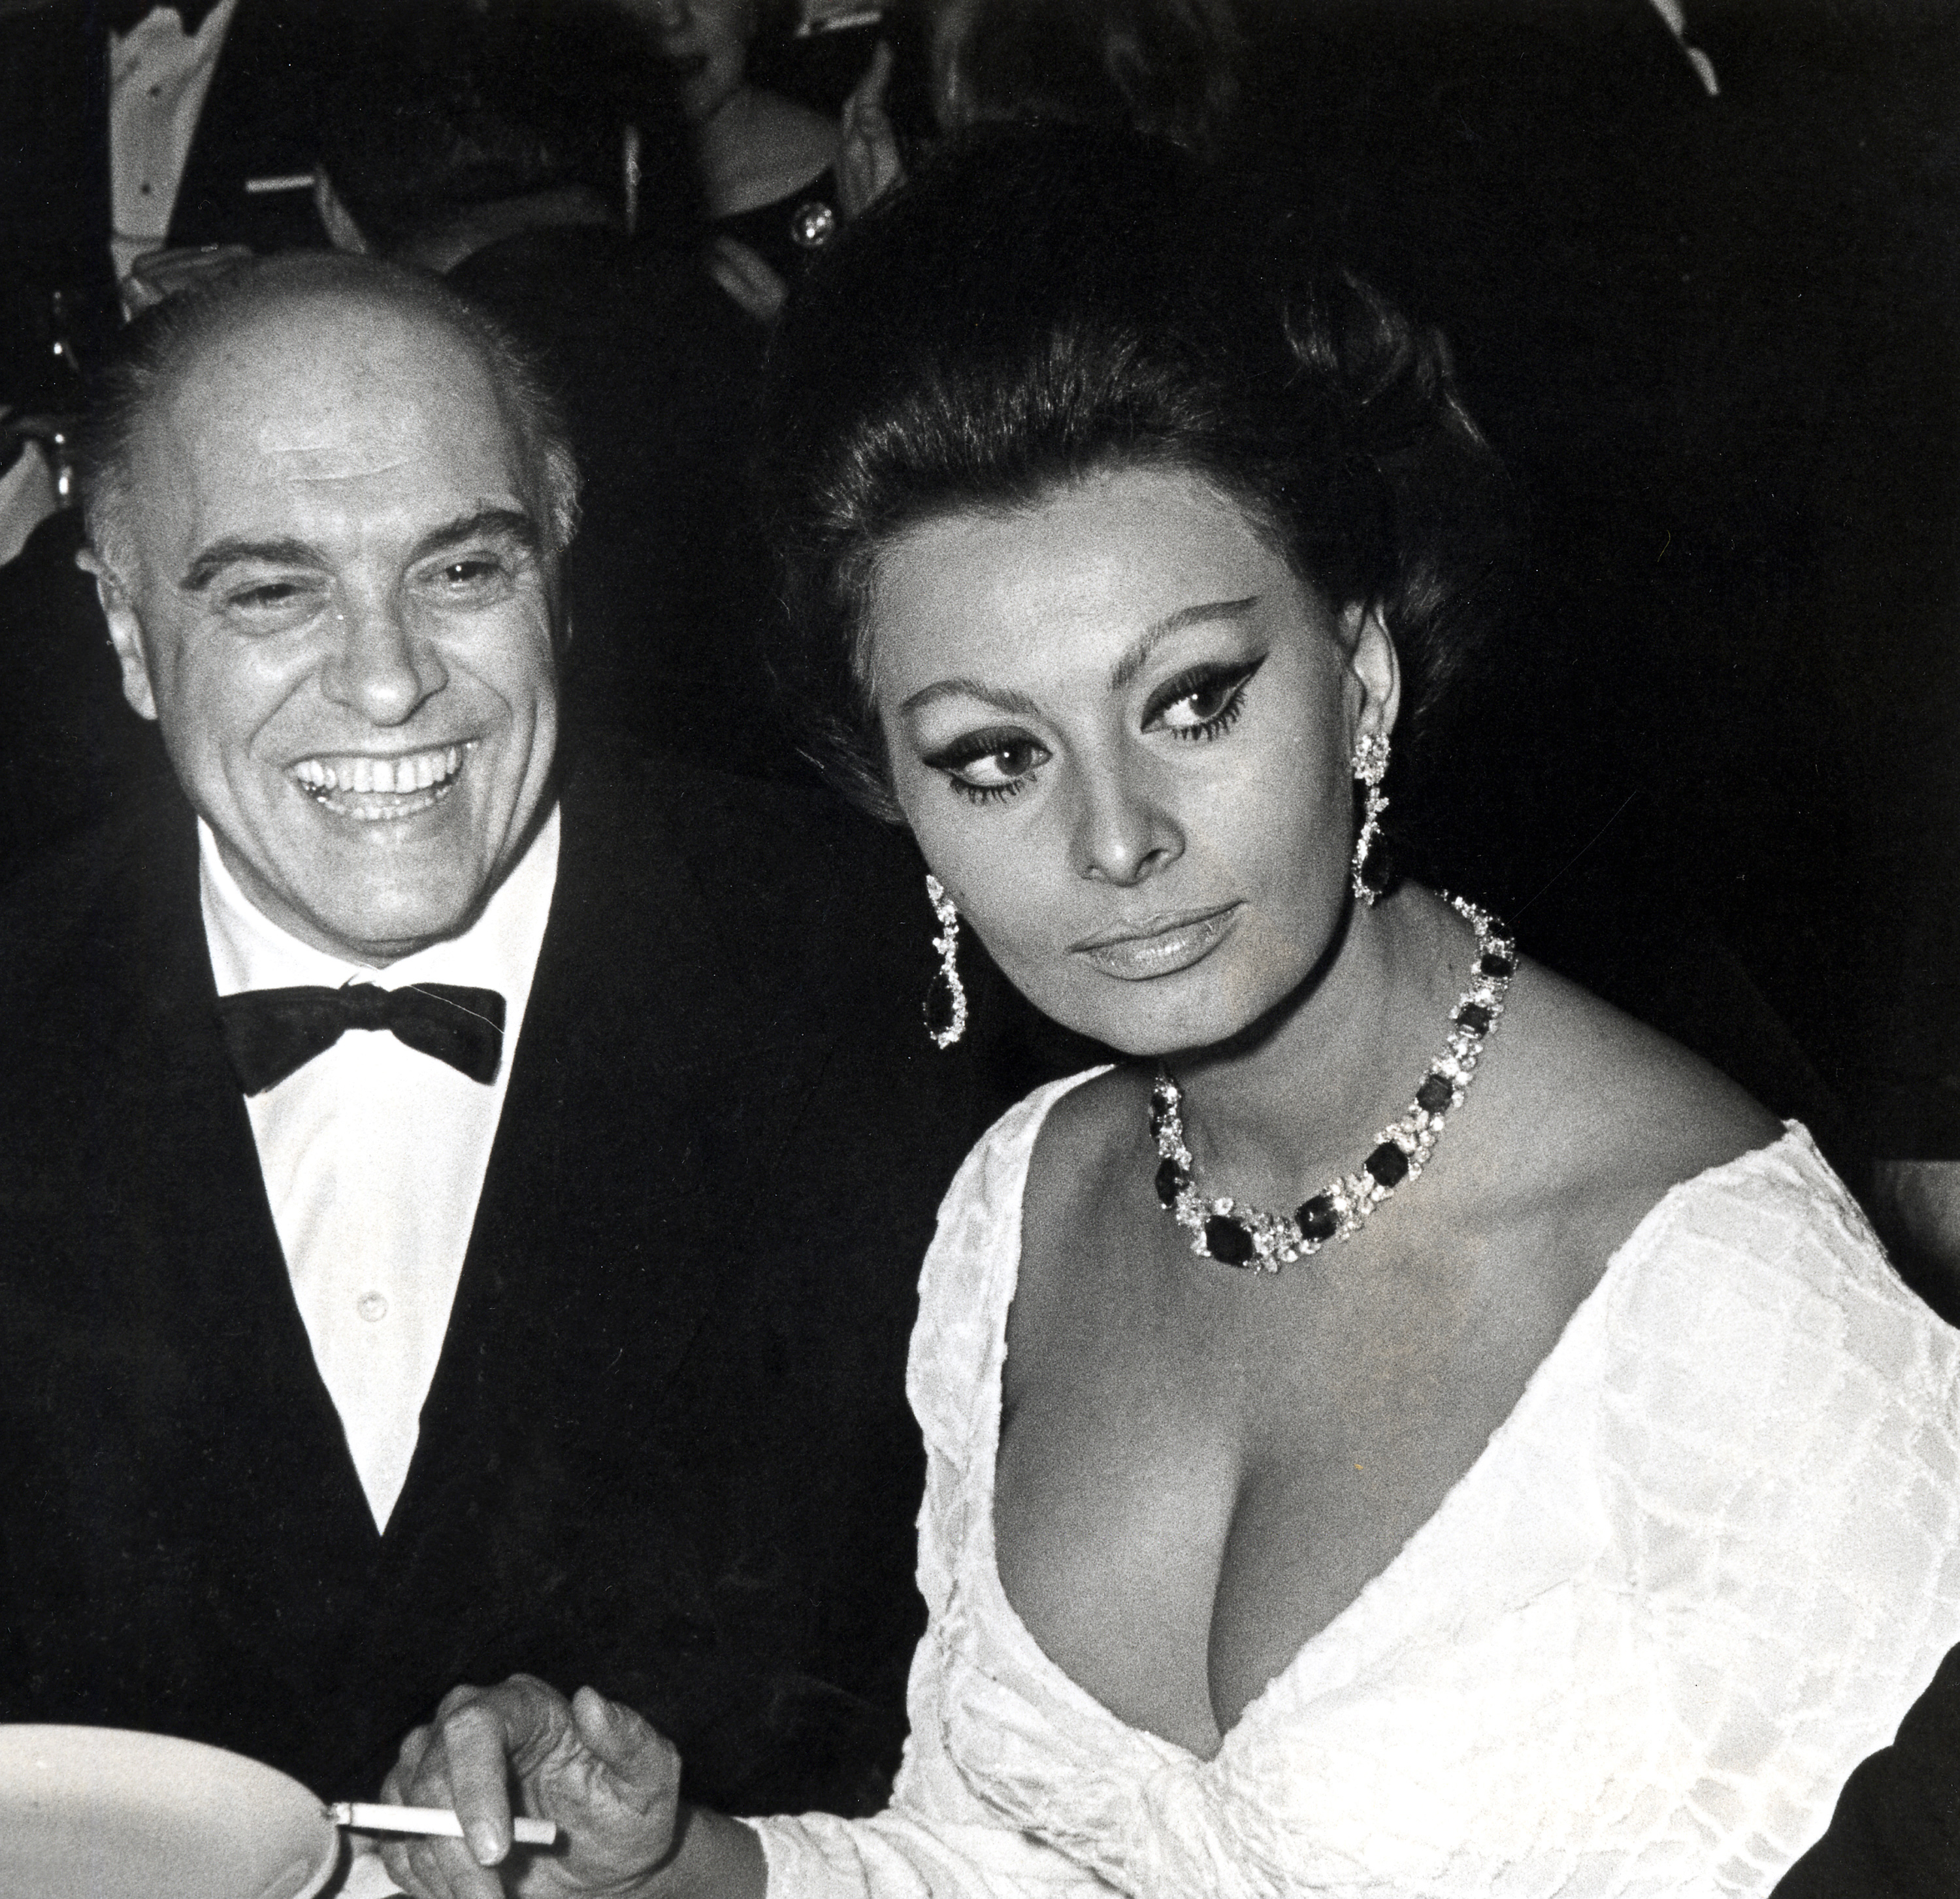 Carlo Ponti and Sophia Loren at the "Dr. Zhivago" premiere party in New York City. | Source: Getty Images